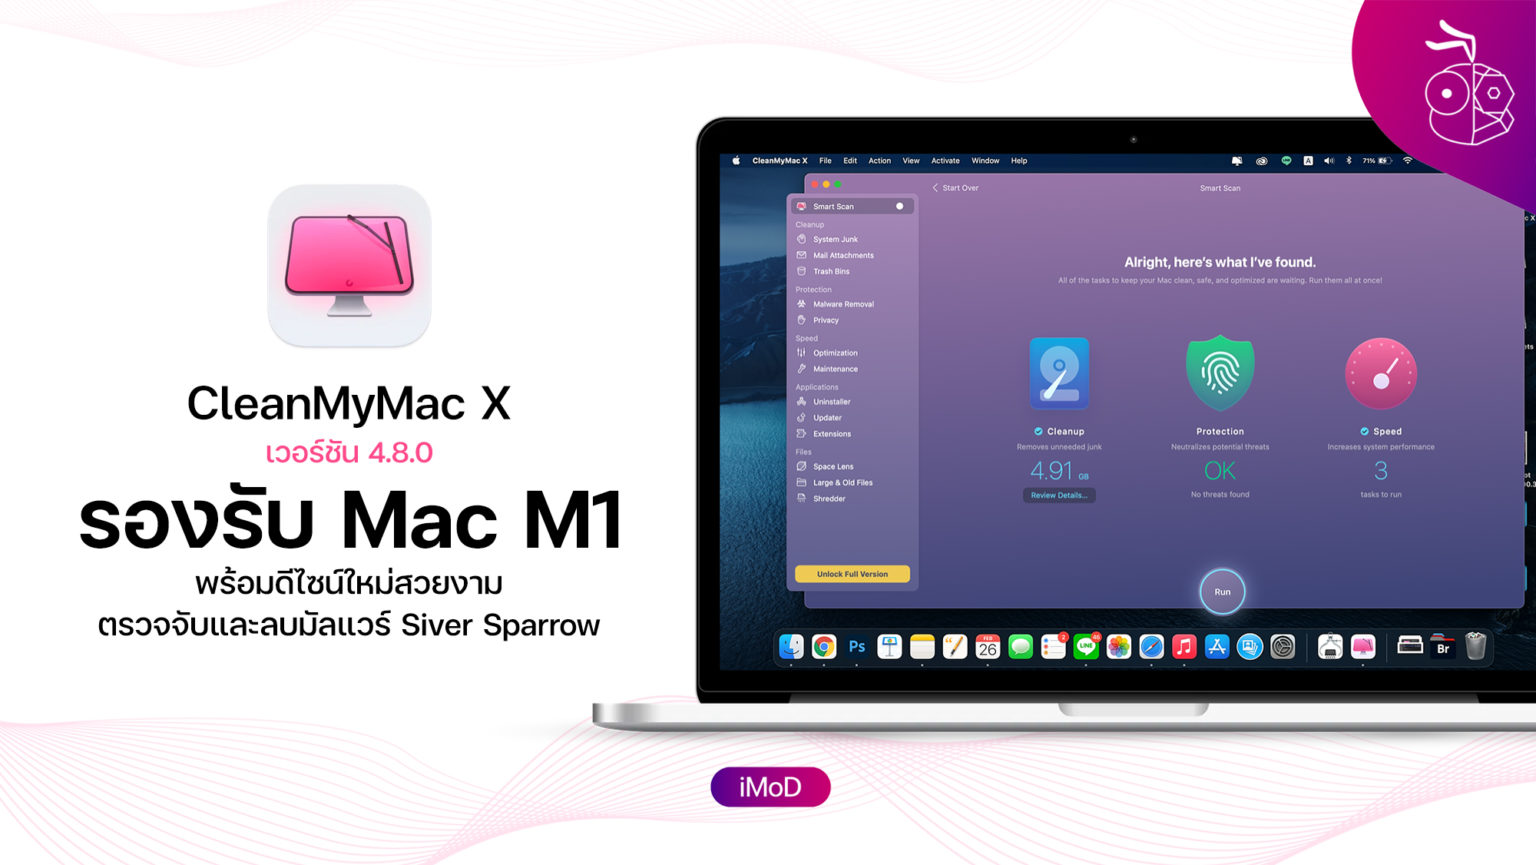 download the new for windows CleanMyMac X